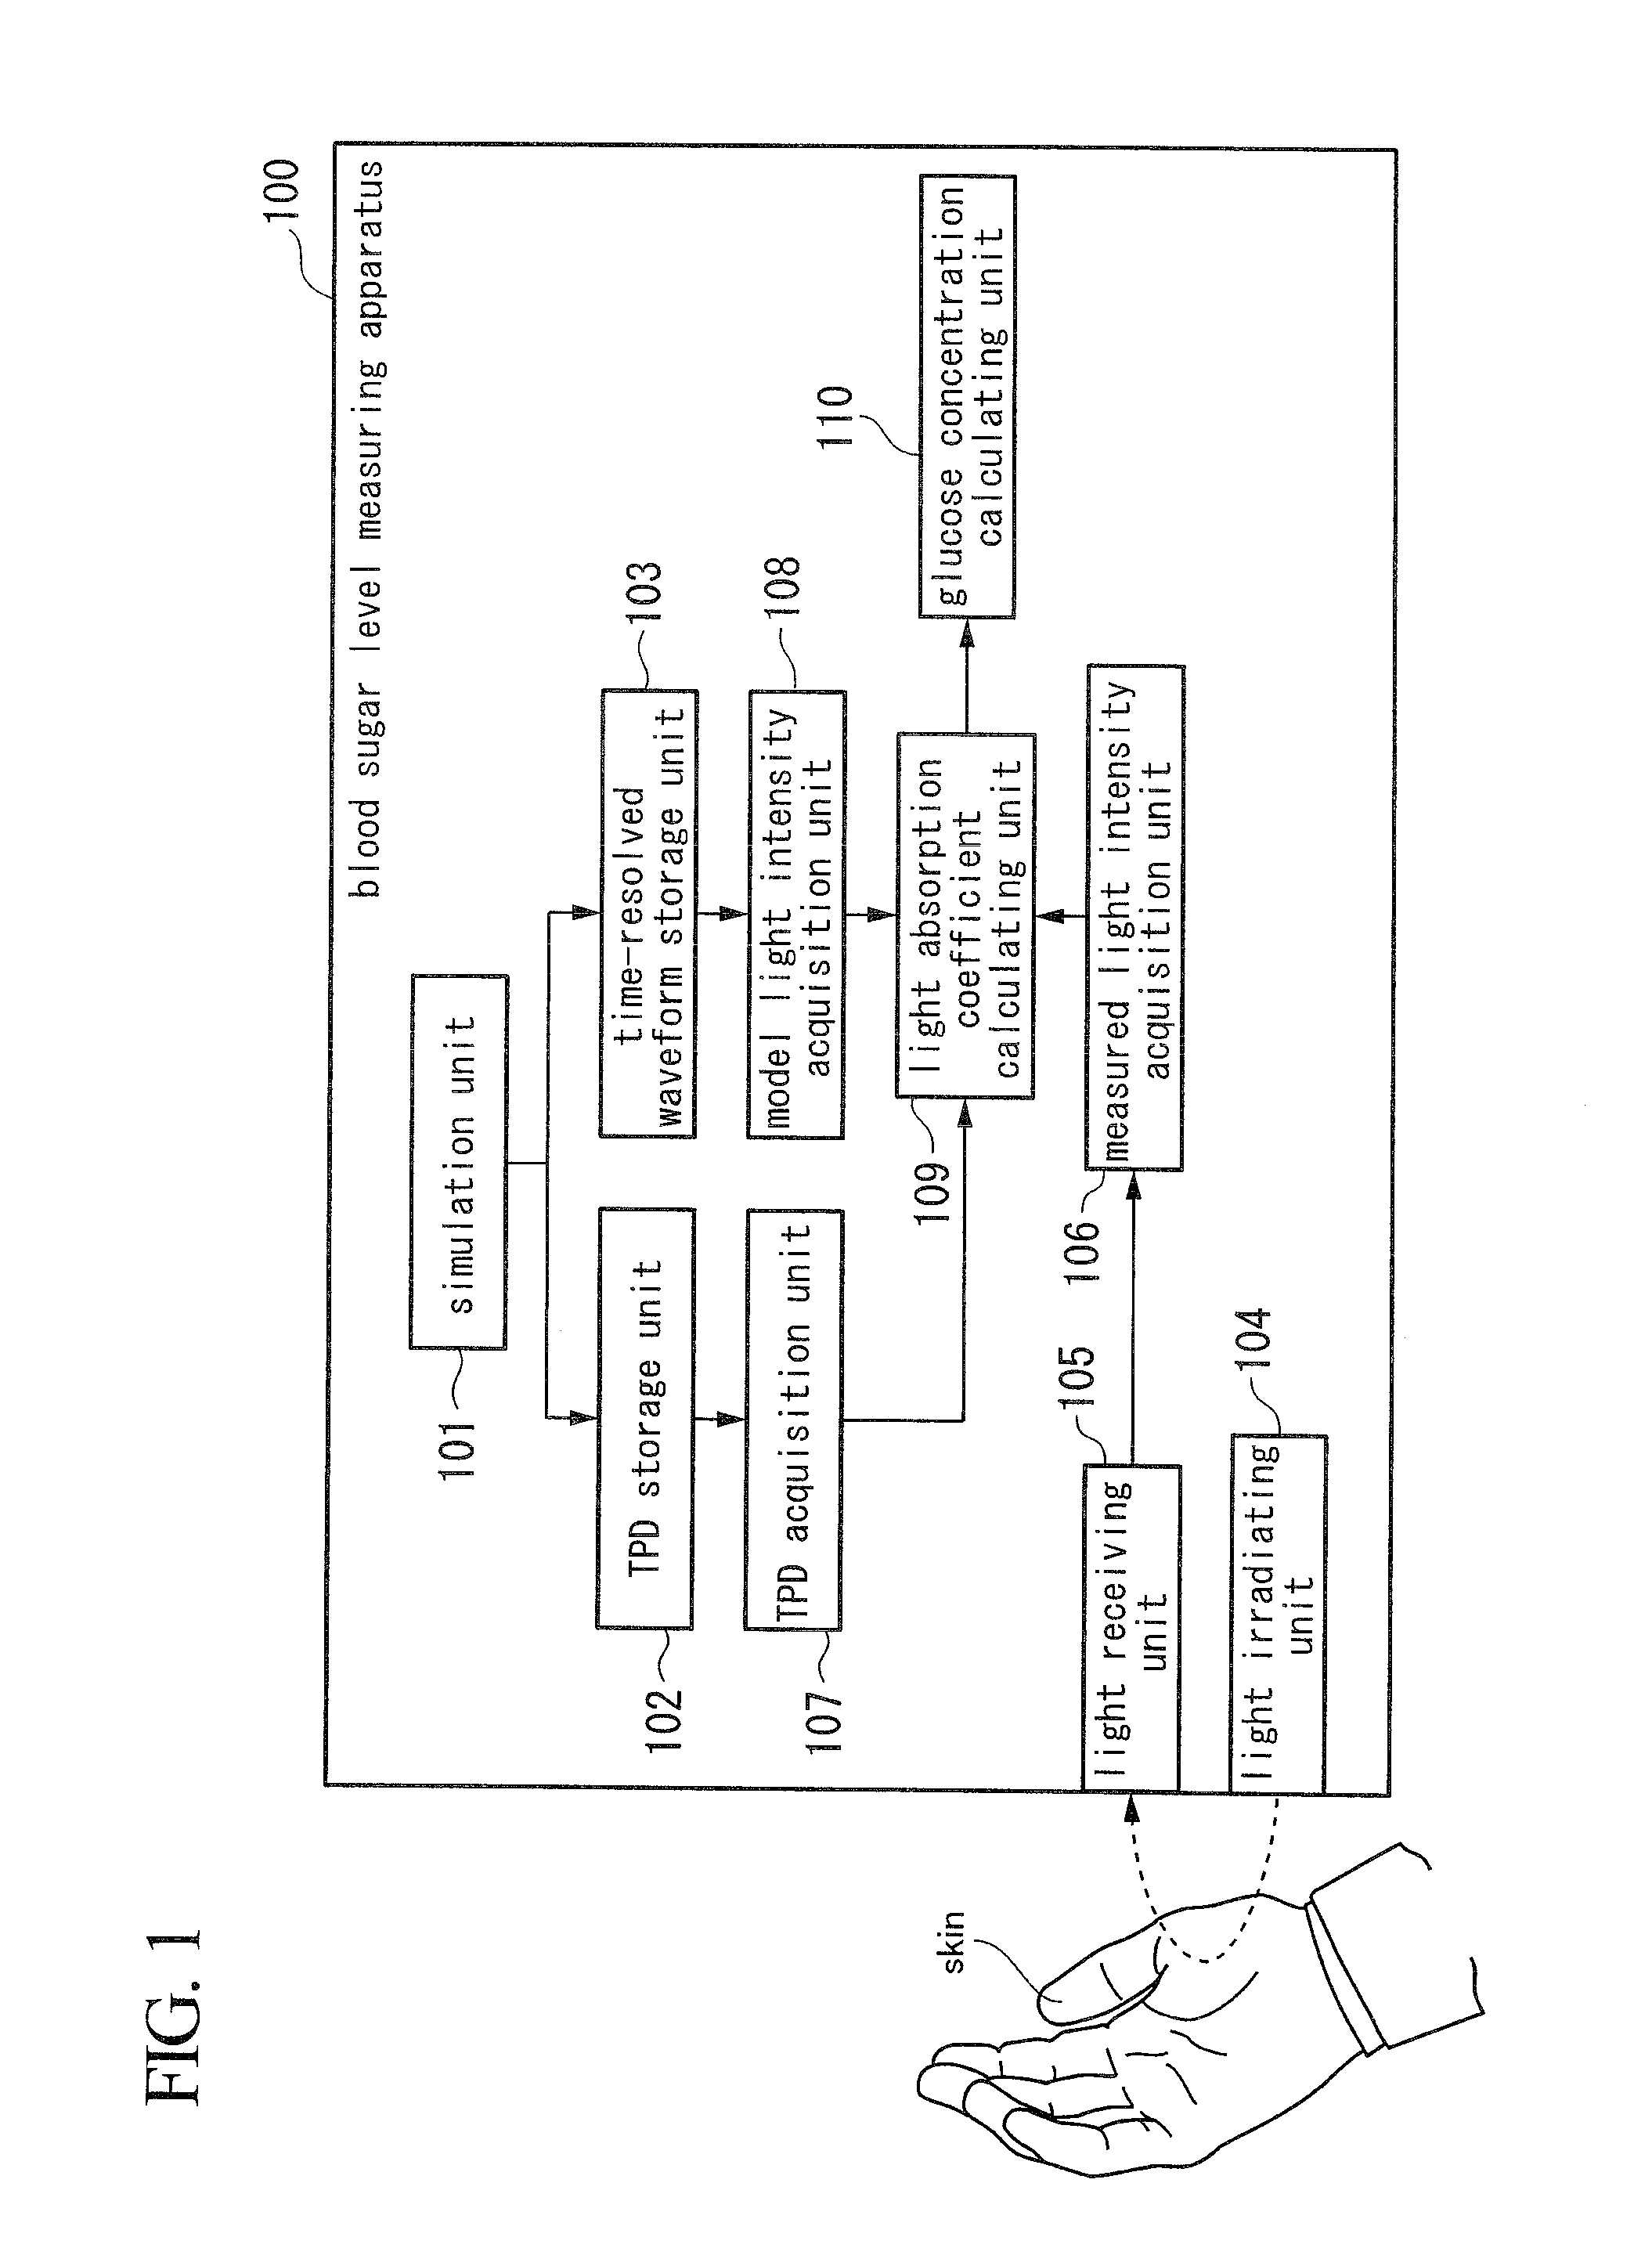 Apparatus for quantifying concentration, method for quantifying concentration, and program for quantifying concentration